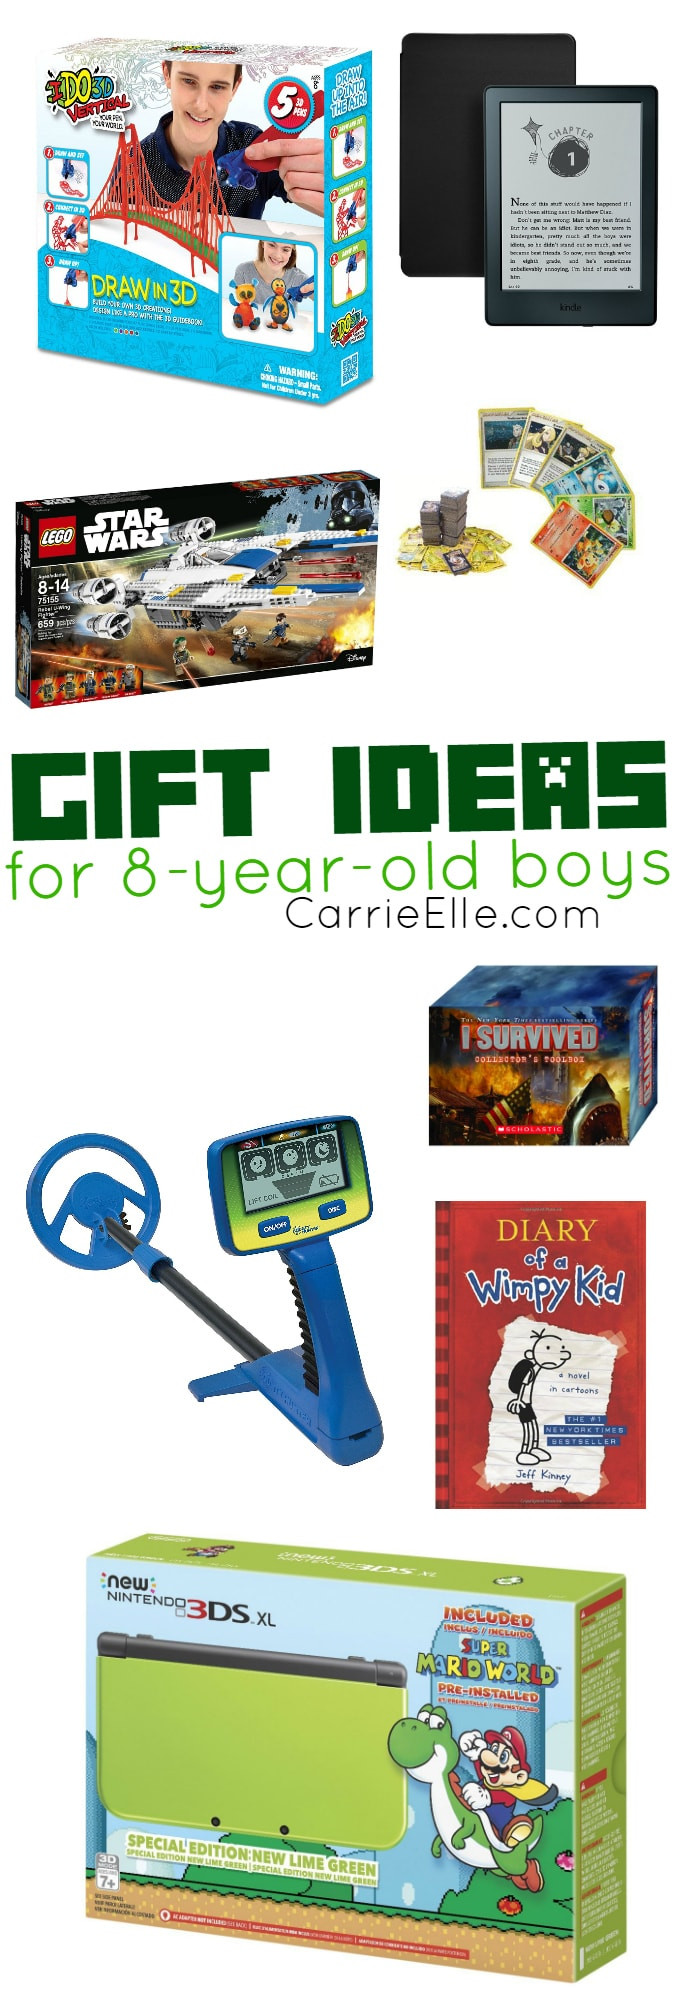 Best Gift Ideas For 8 Year Old Boy
 Gift Ideas for 8 Year Old Boys Carrie Elle